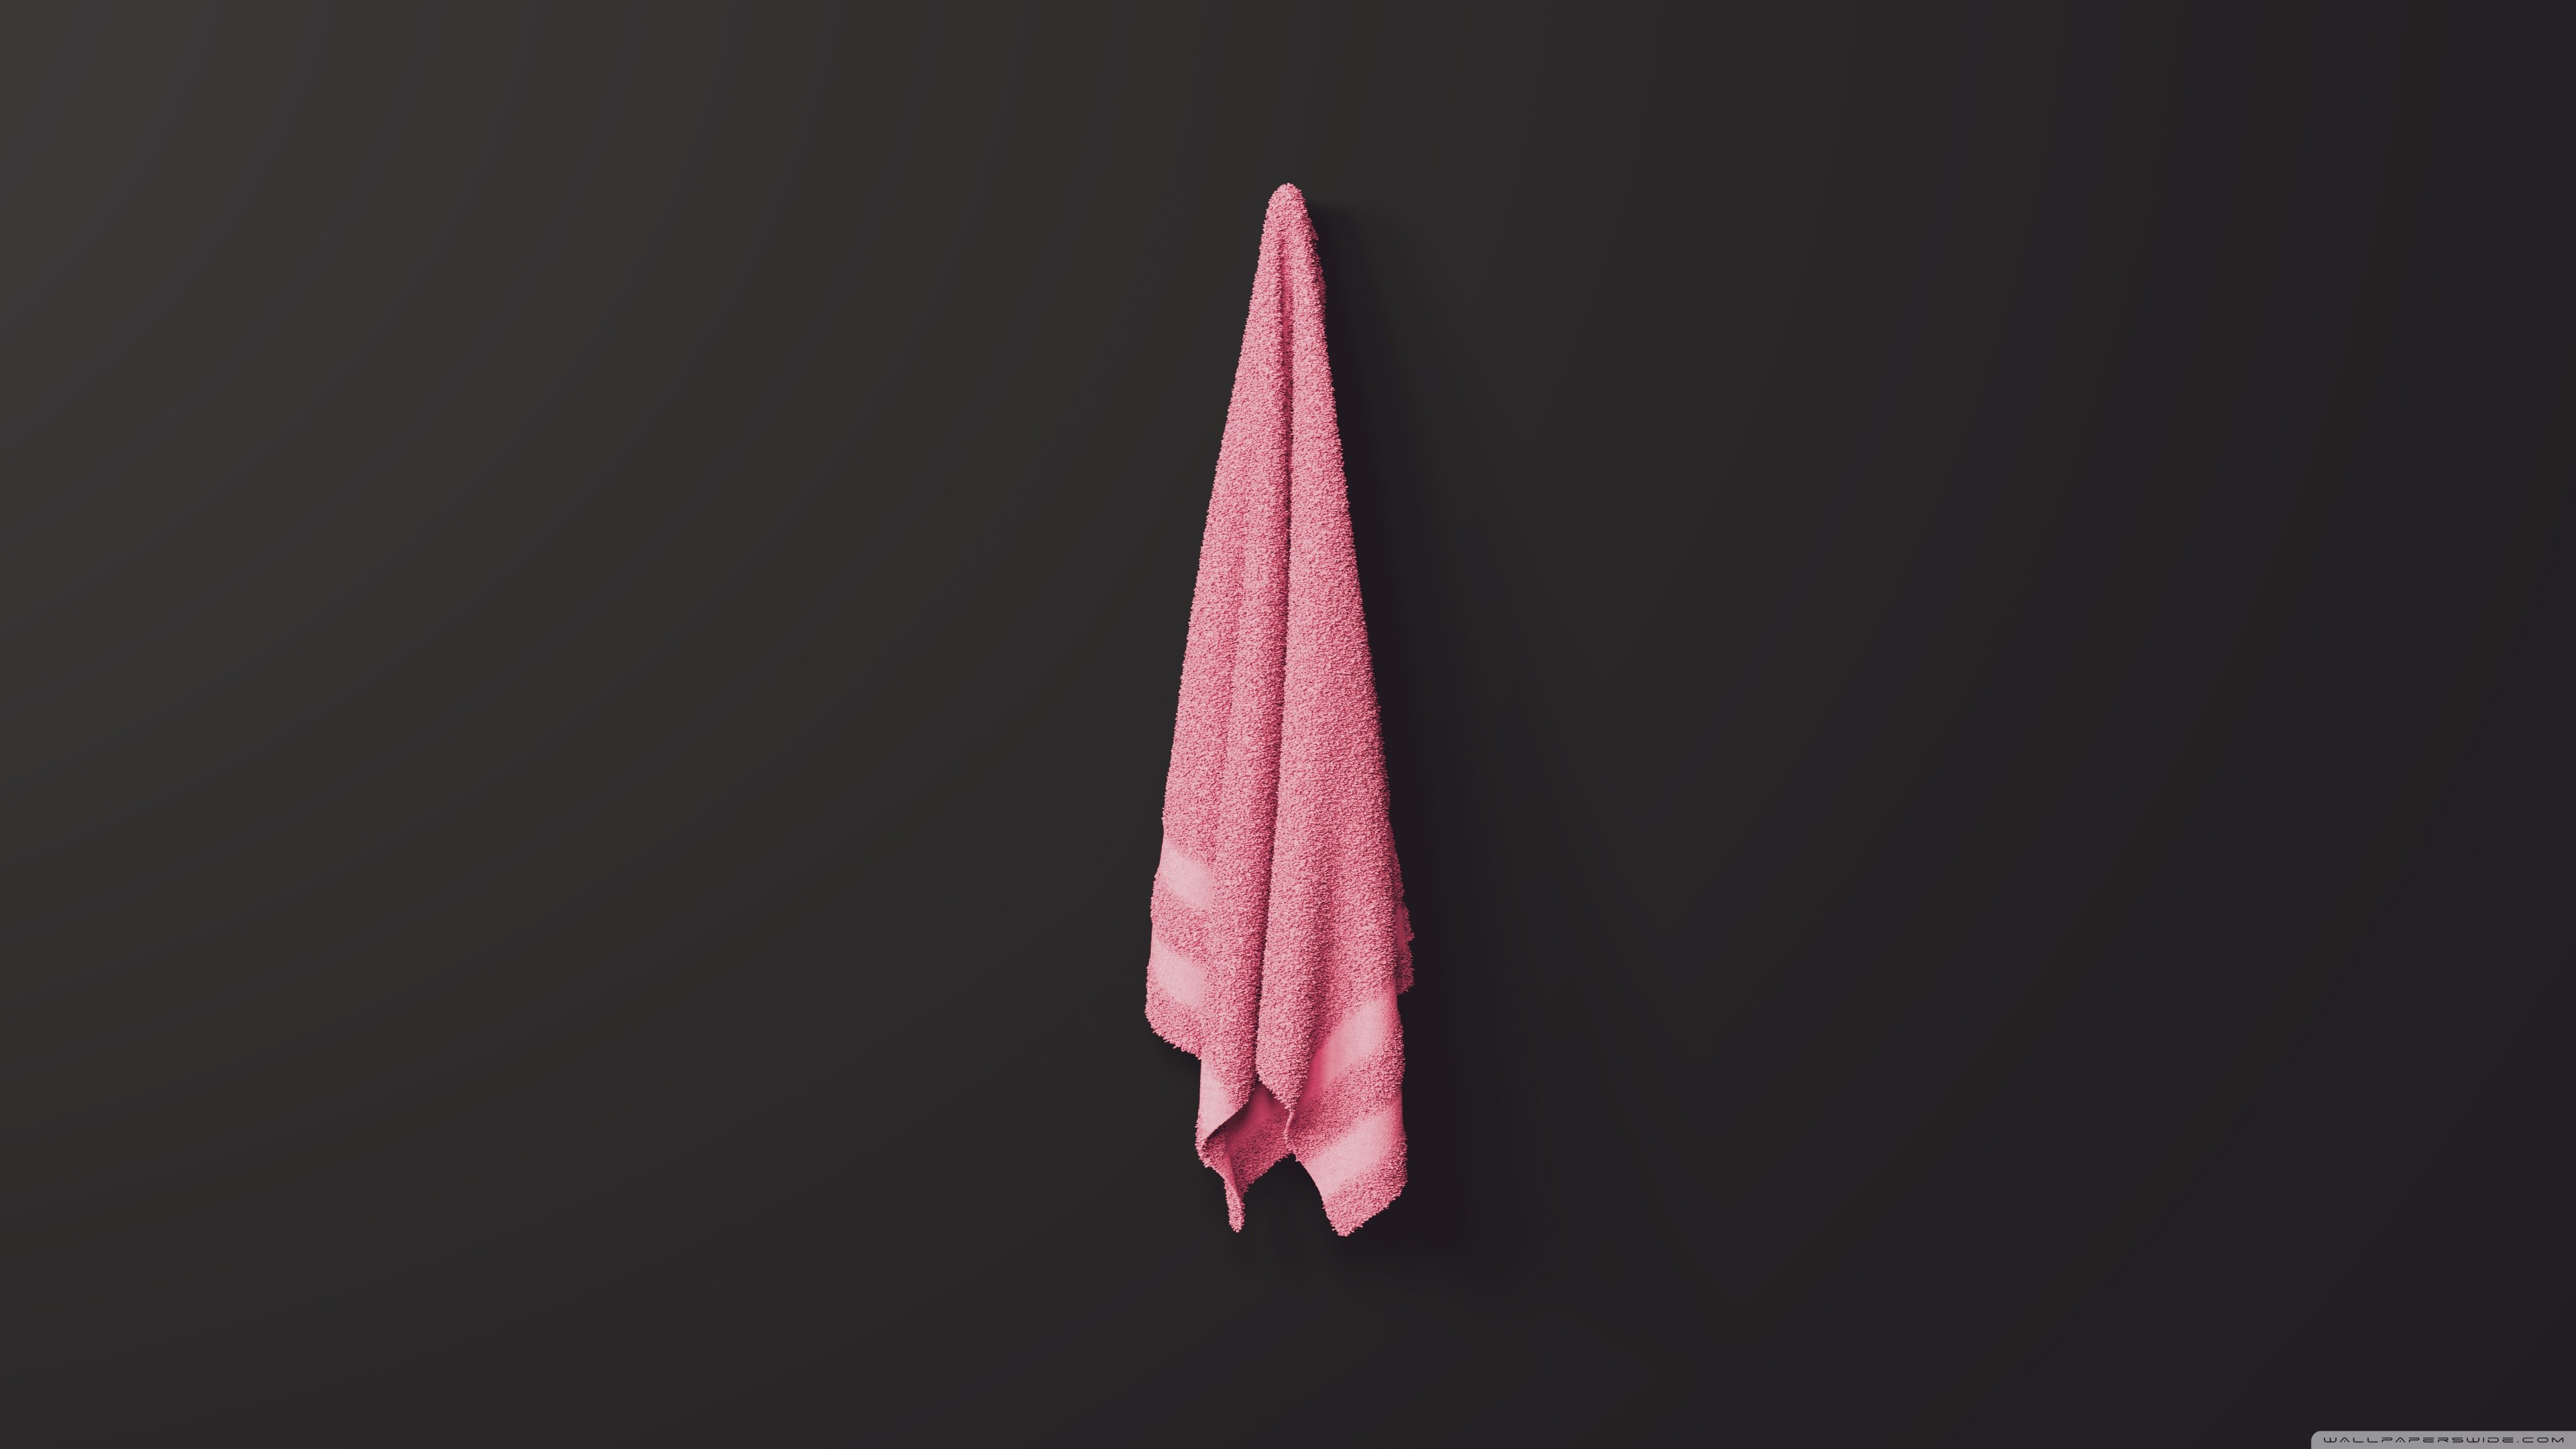 3840x2160 Minimal Towel Red 4K HD Wide Wallpaper for Widescreen